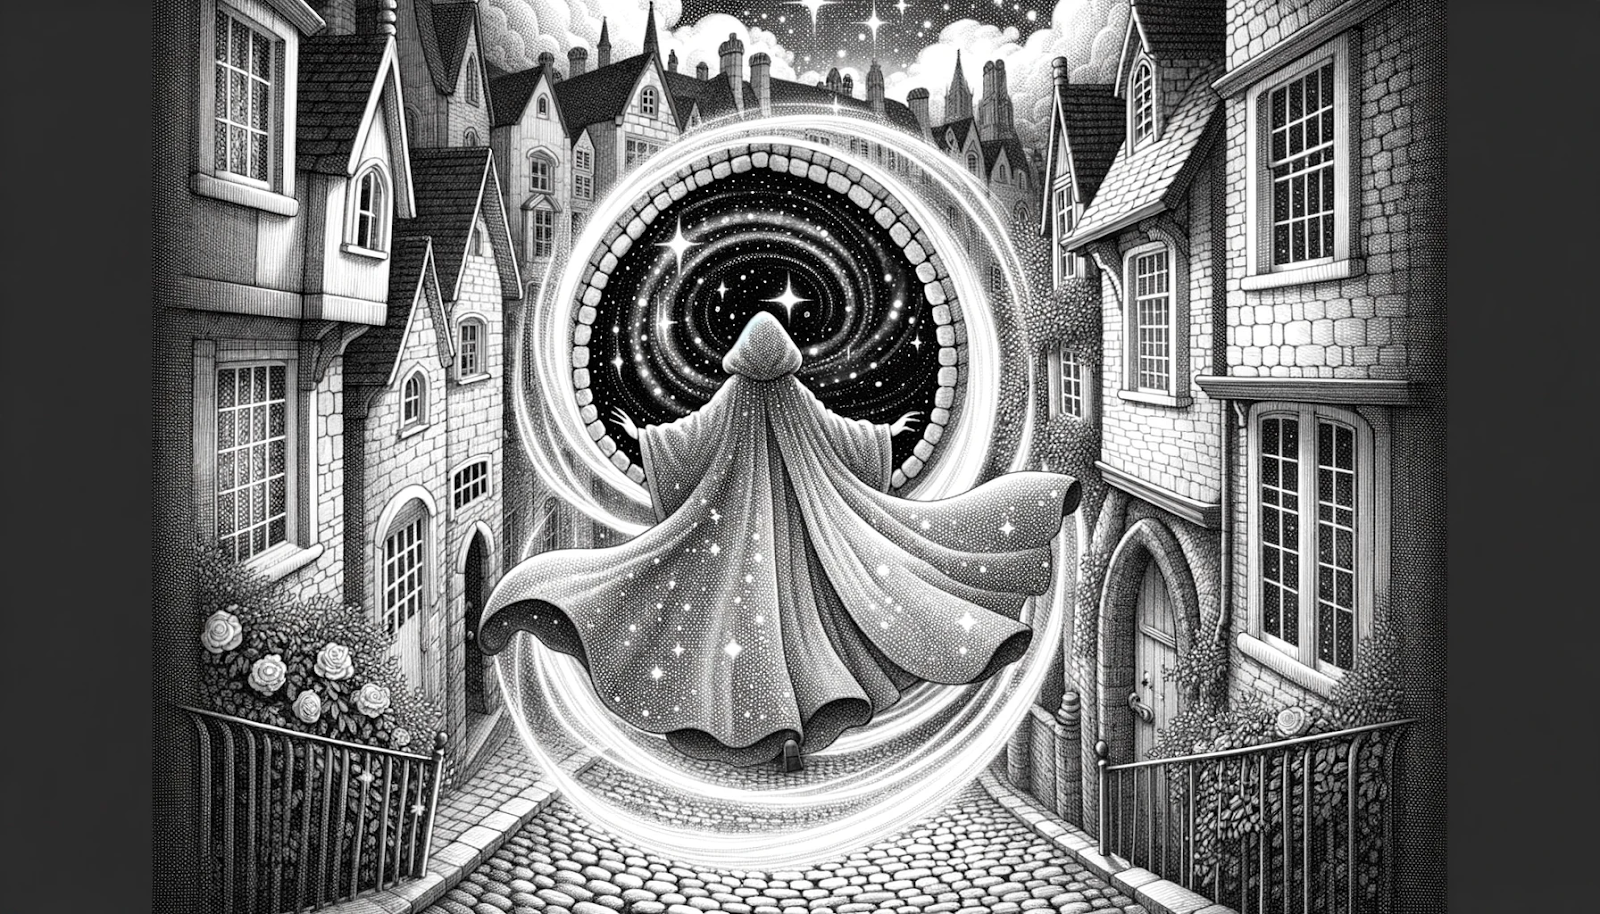 Illustration of Seraphine, donning a cloak shimmering with starlight, stepping through a swirling portal. She emerges in a quaint cobblestone alley of a sleeping town. The details of the town are evident with a distant hum of cars, a soft breeze rustling leaves, and the gentle fragrance of blooming roses. The sky above is dotted with stars, and the silhouettes of old buildings frame the scene.